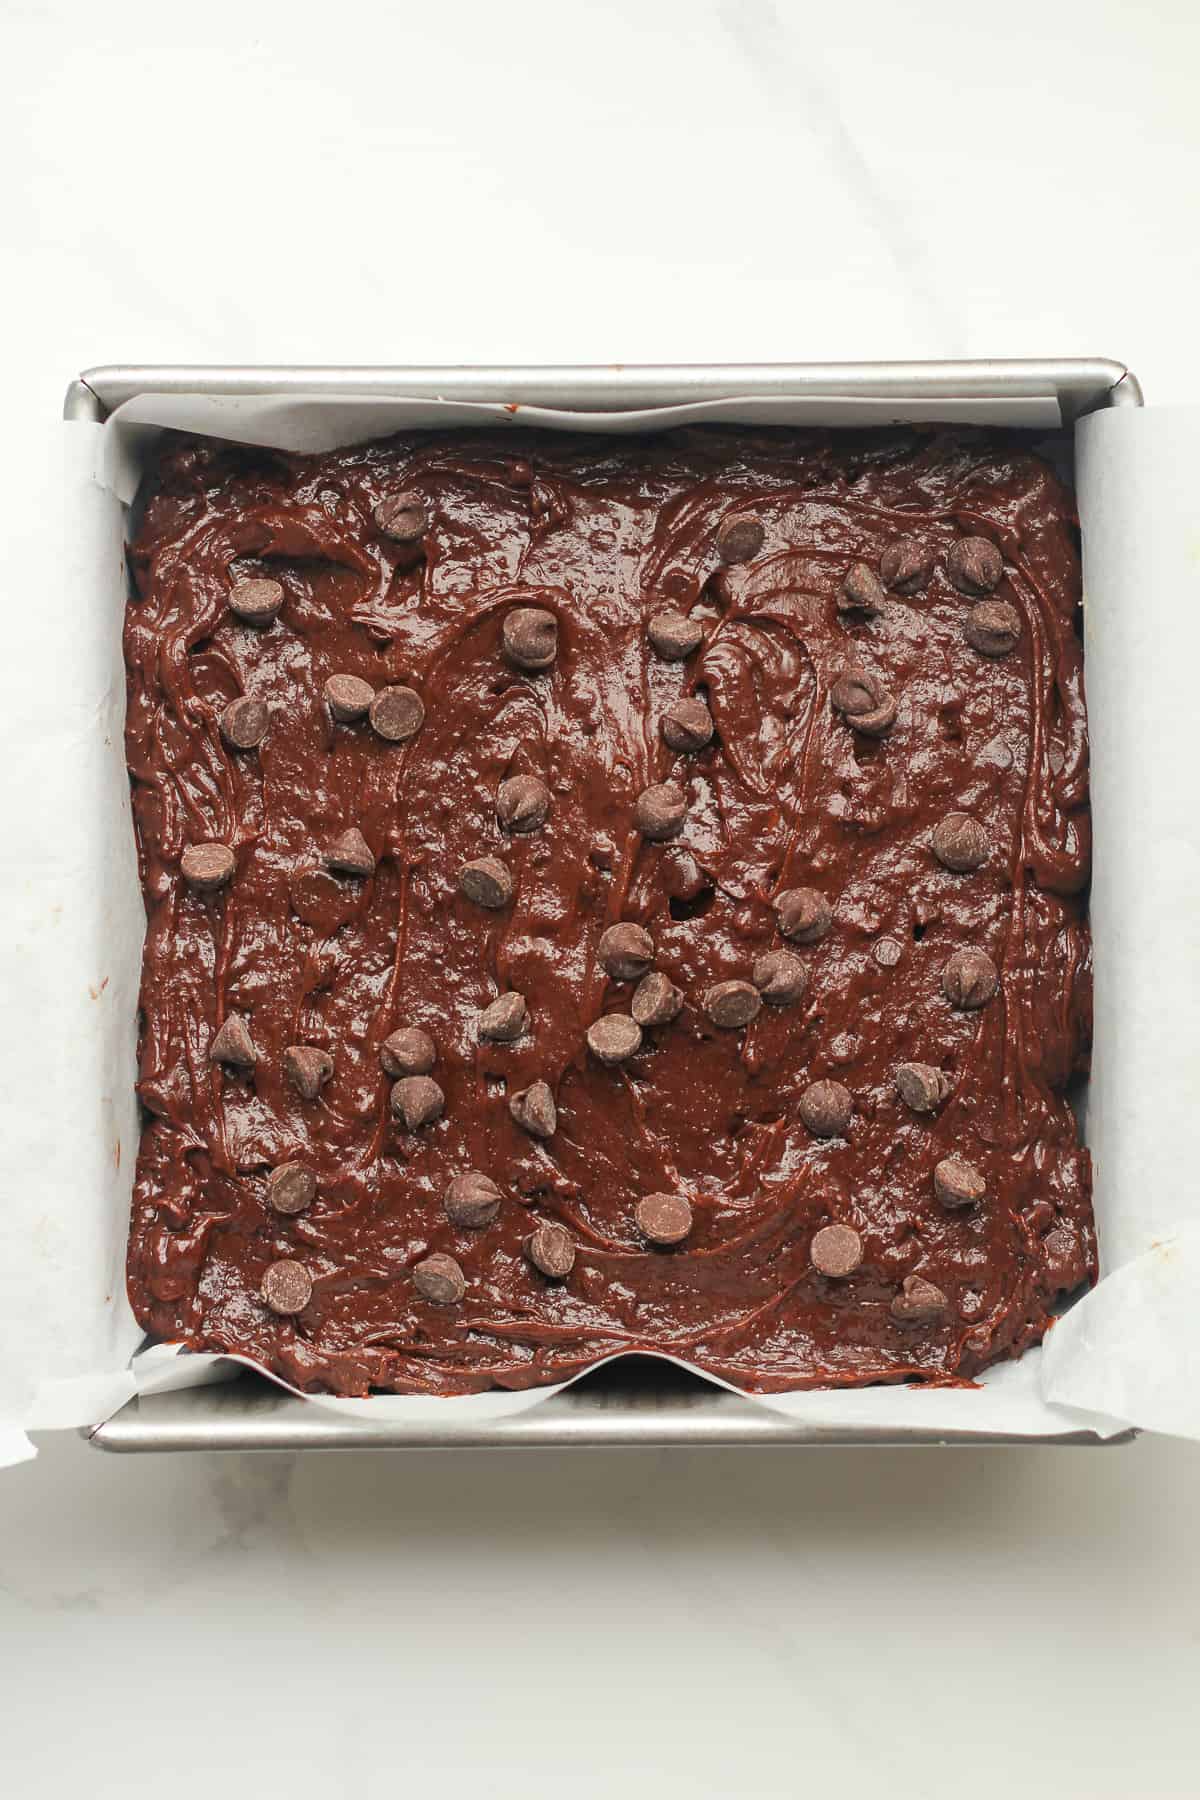 The pan with the brownie layer on top (layer 3).